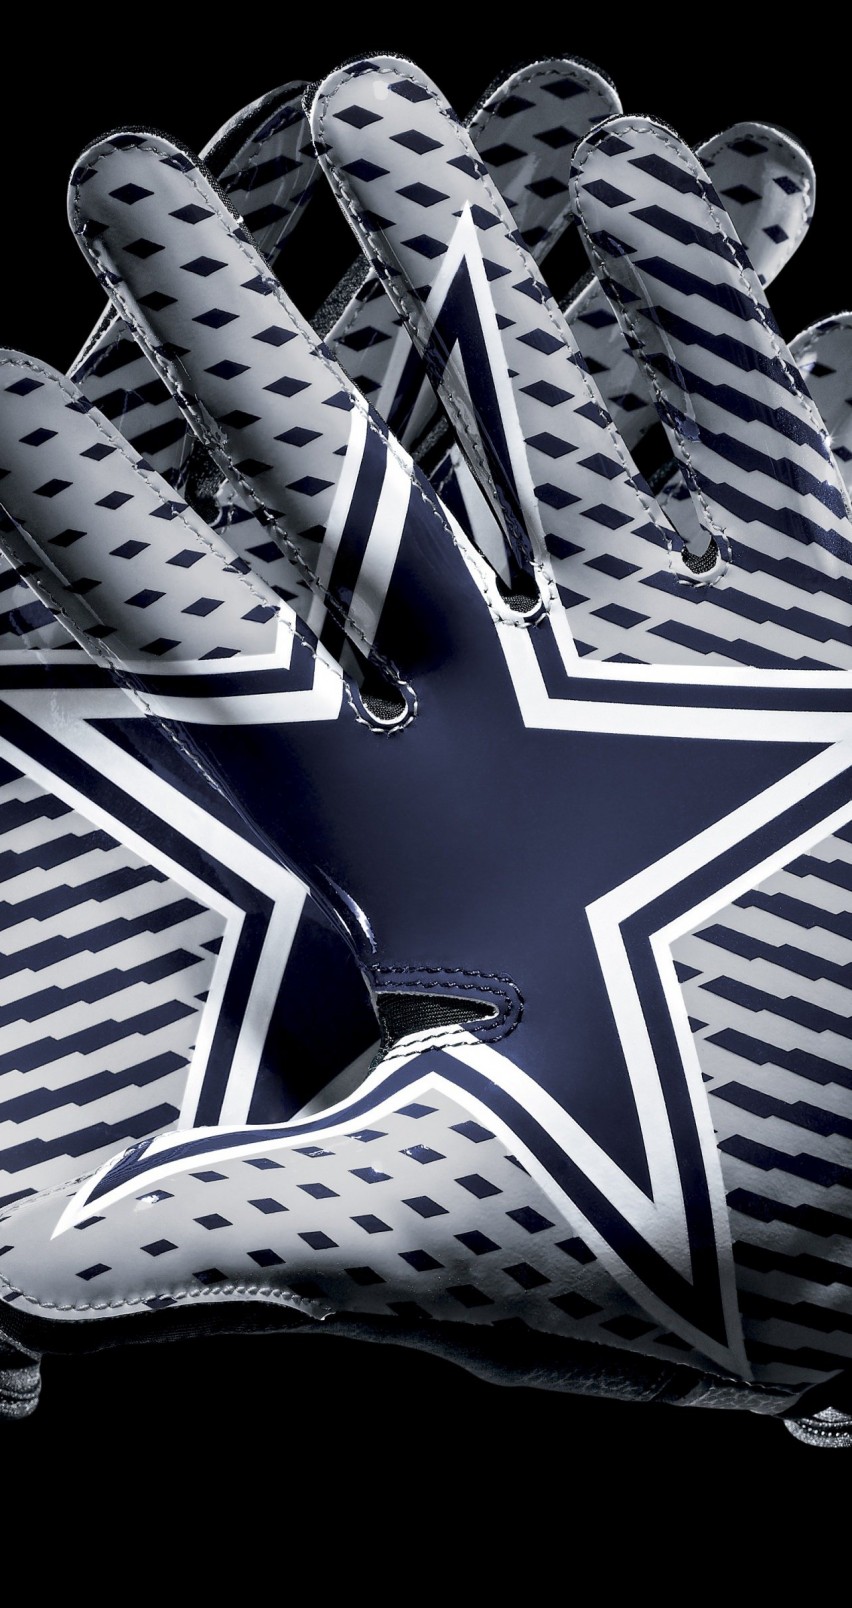 Dallas Cowboys Gloves Wallpaper for Apple iPhone 6 / 6s